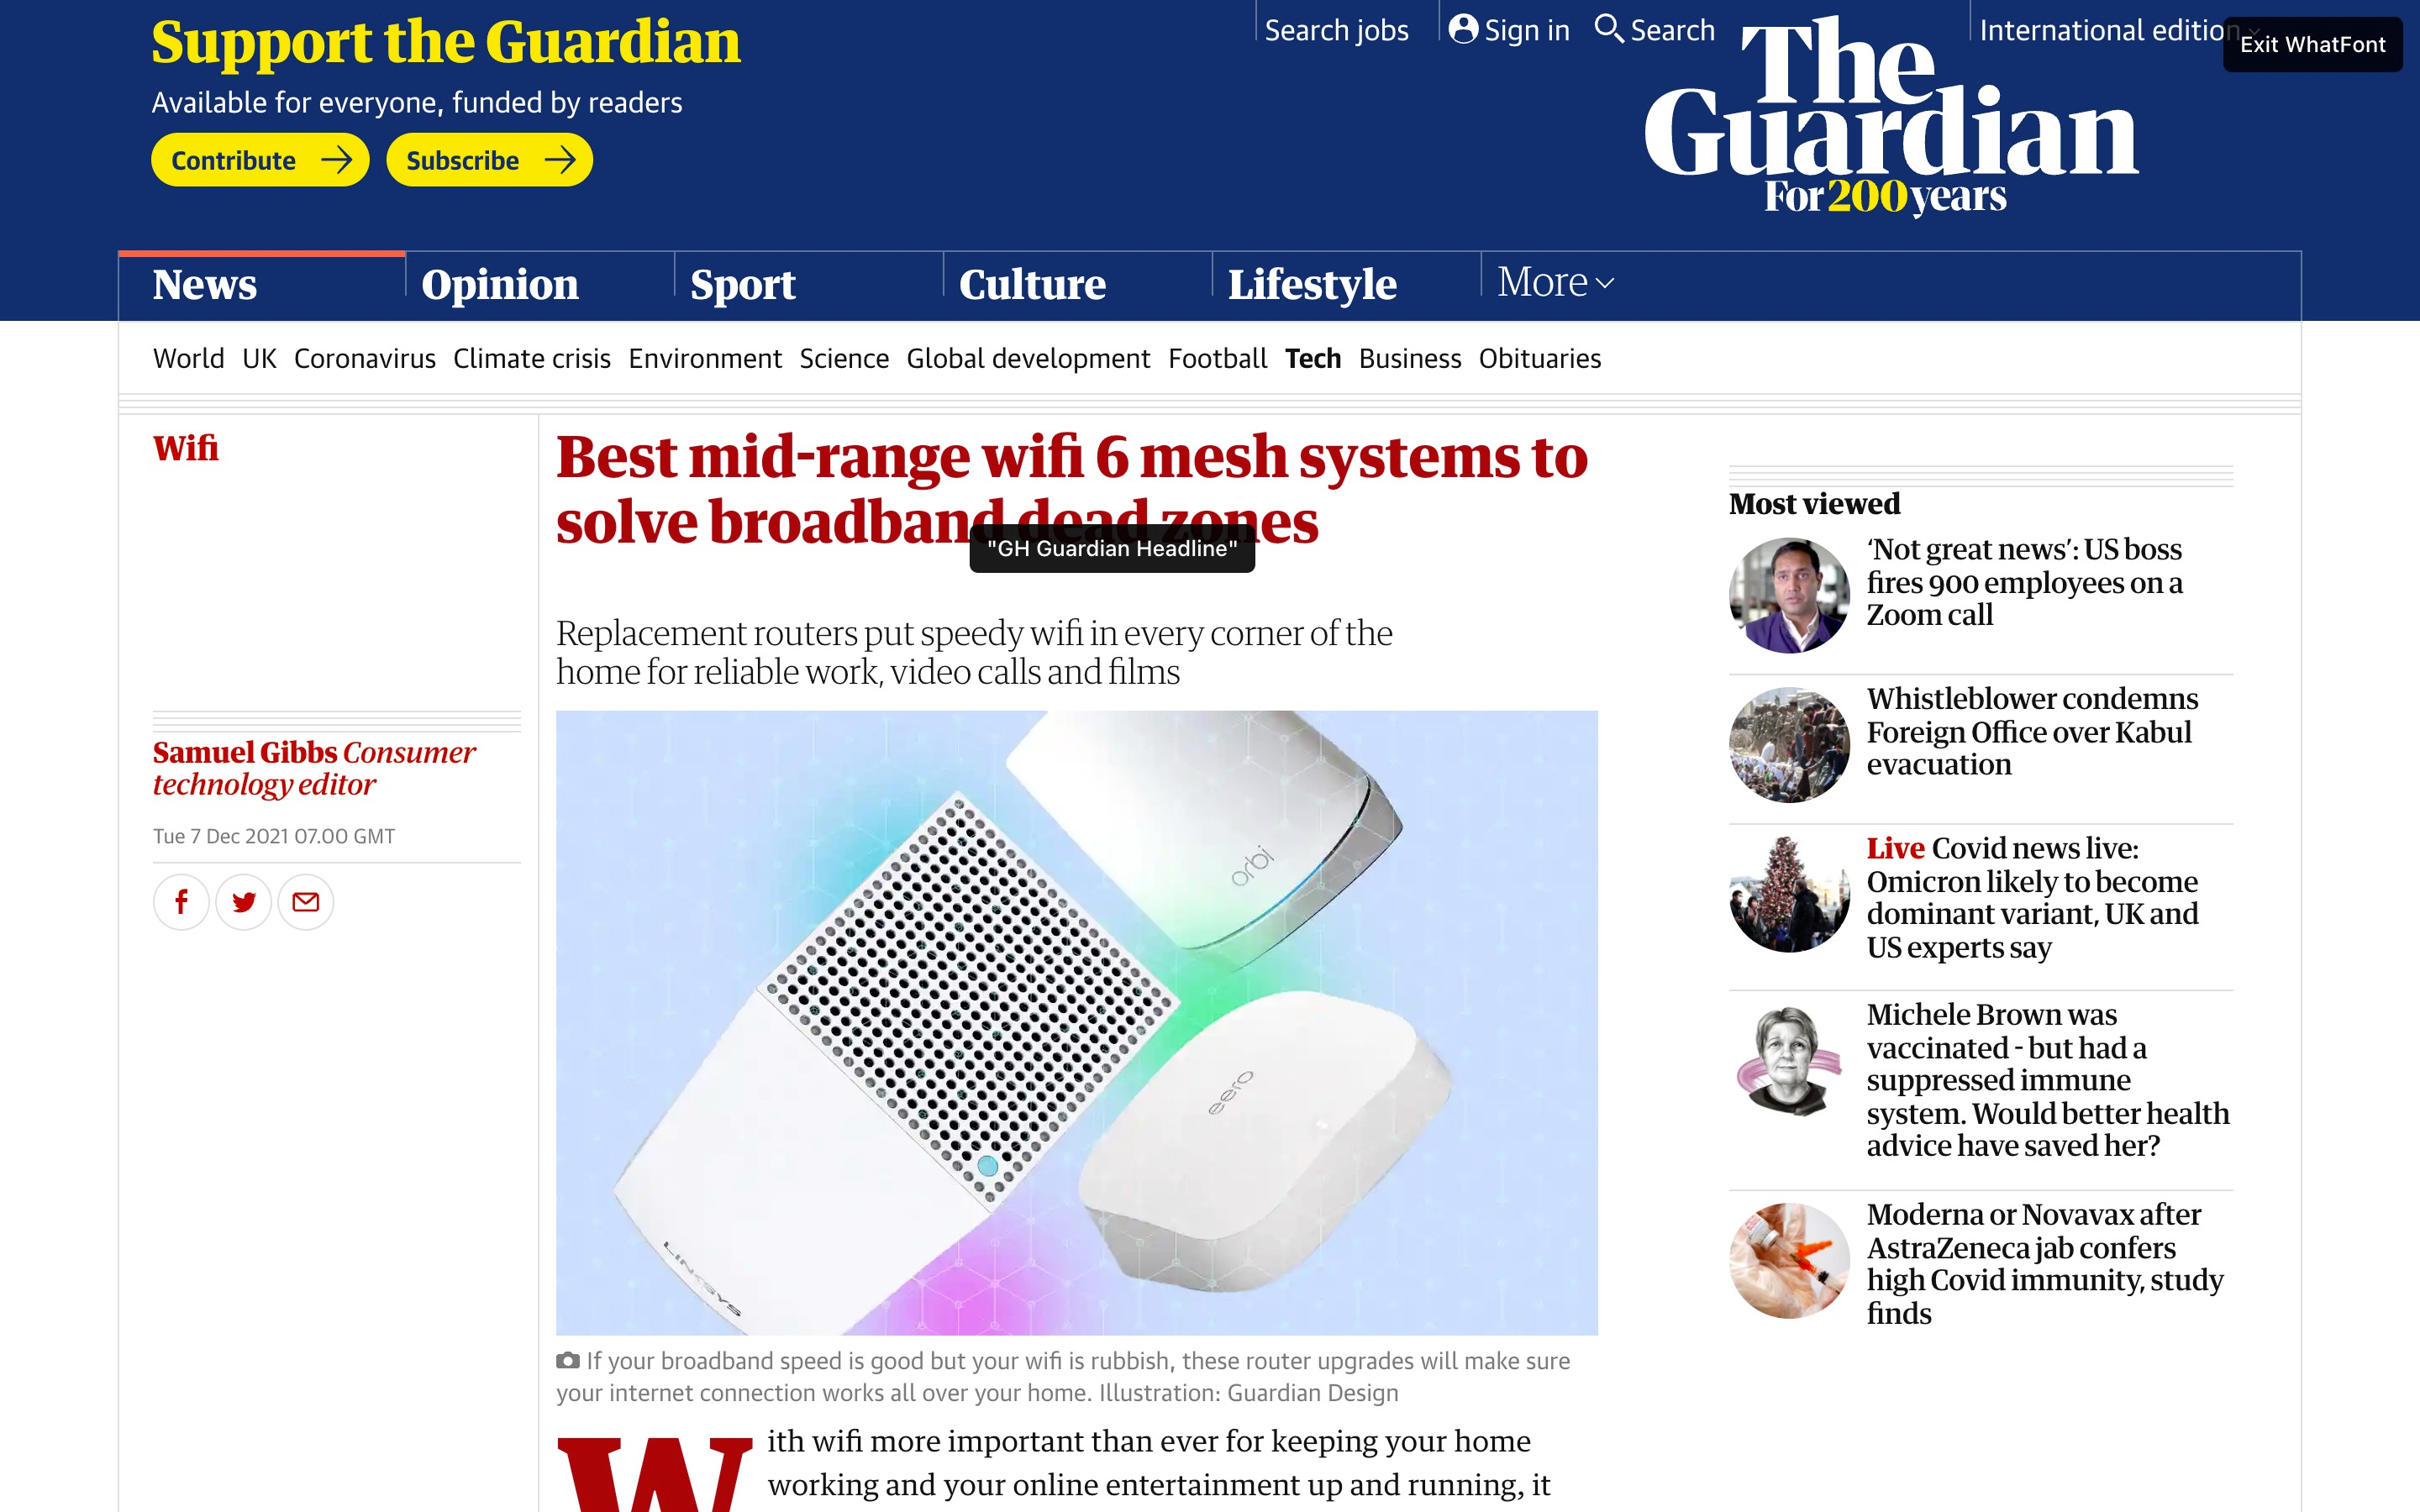 The Whatfont plugin in use on The Guardian's website